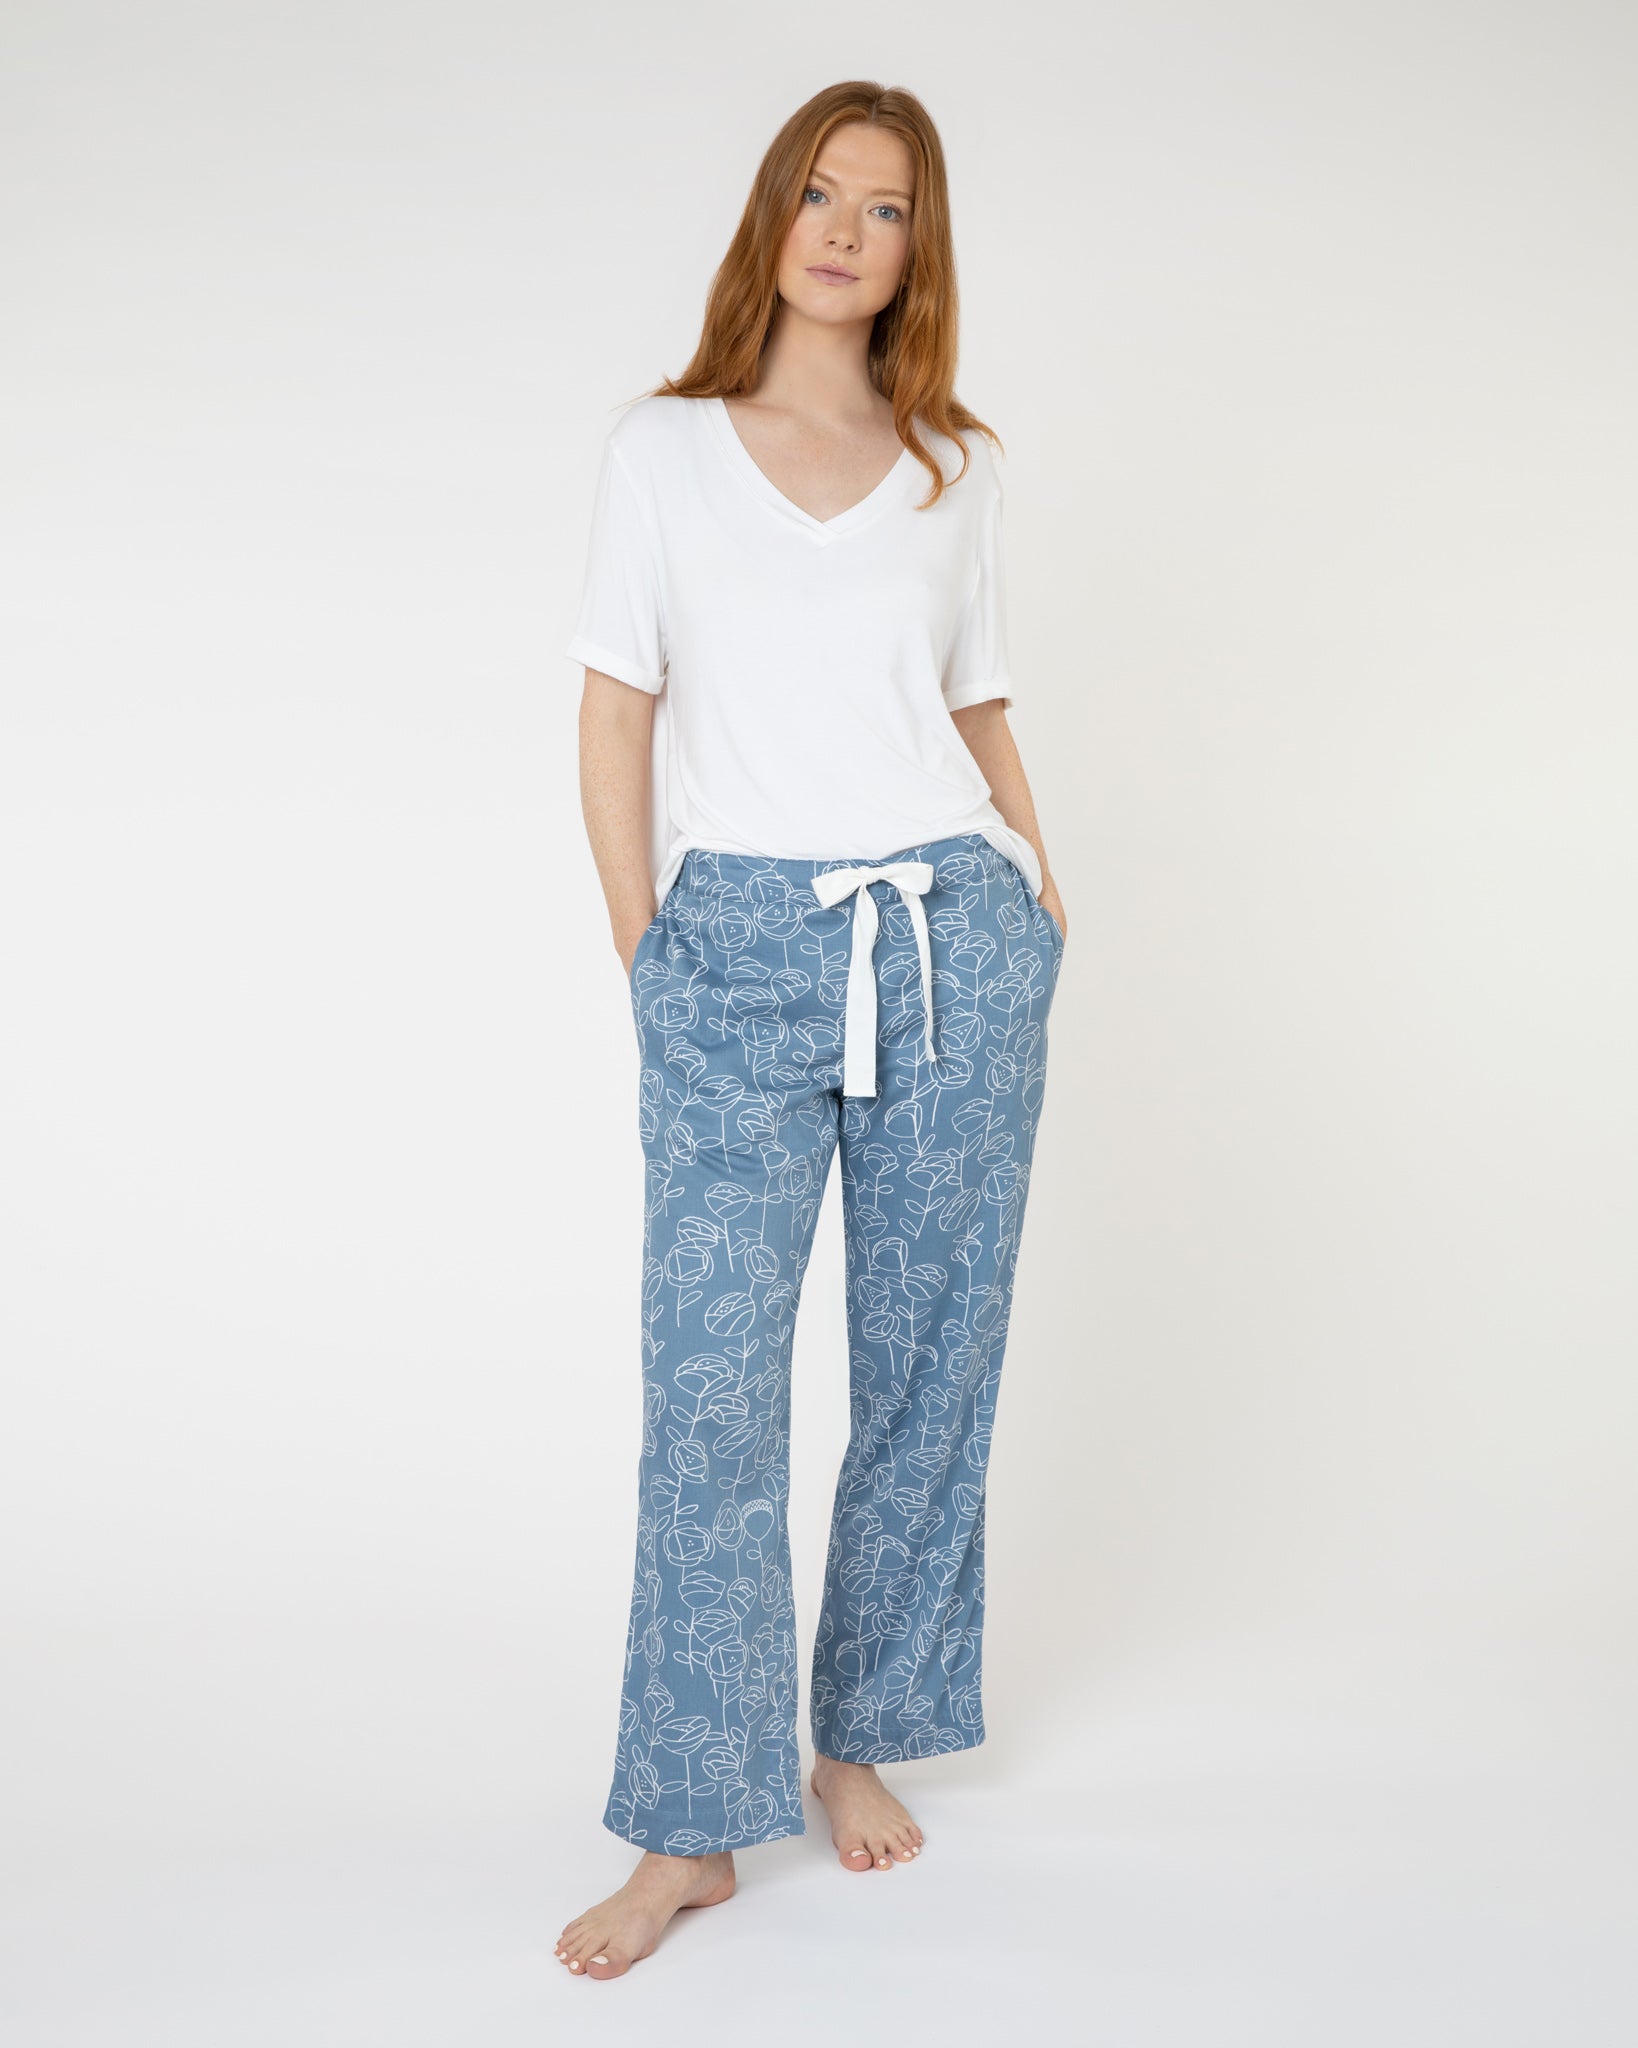 Woman wearing blue and white floral luxury organic cotton pyjama bottoms from Yawn.